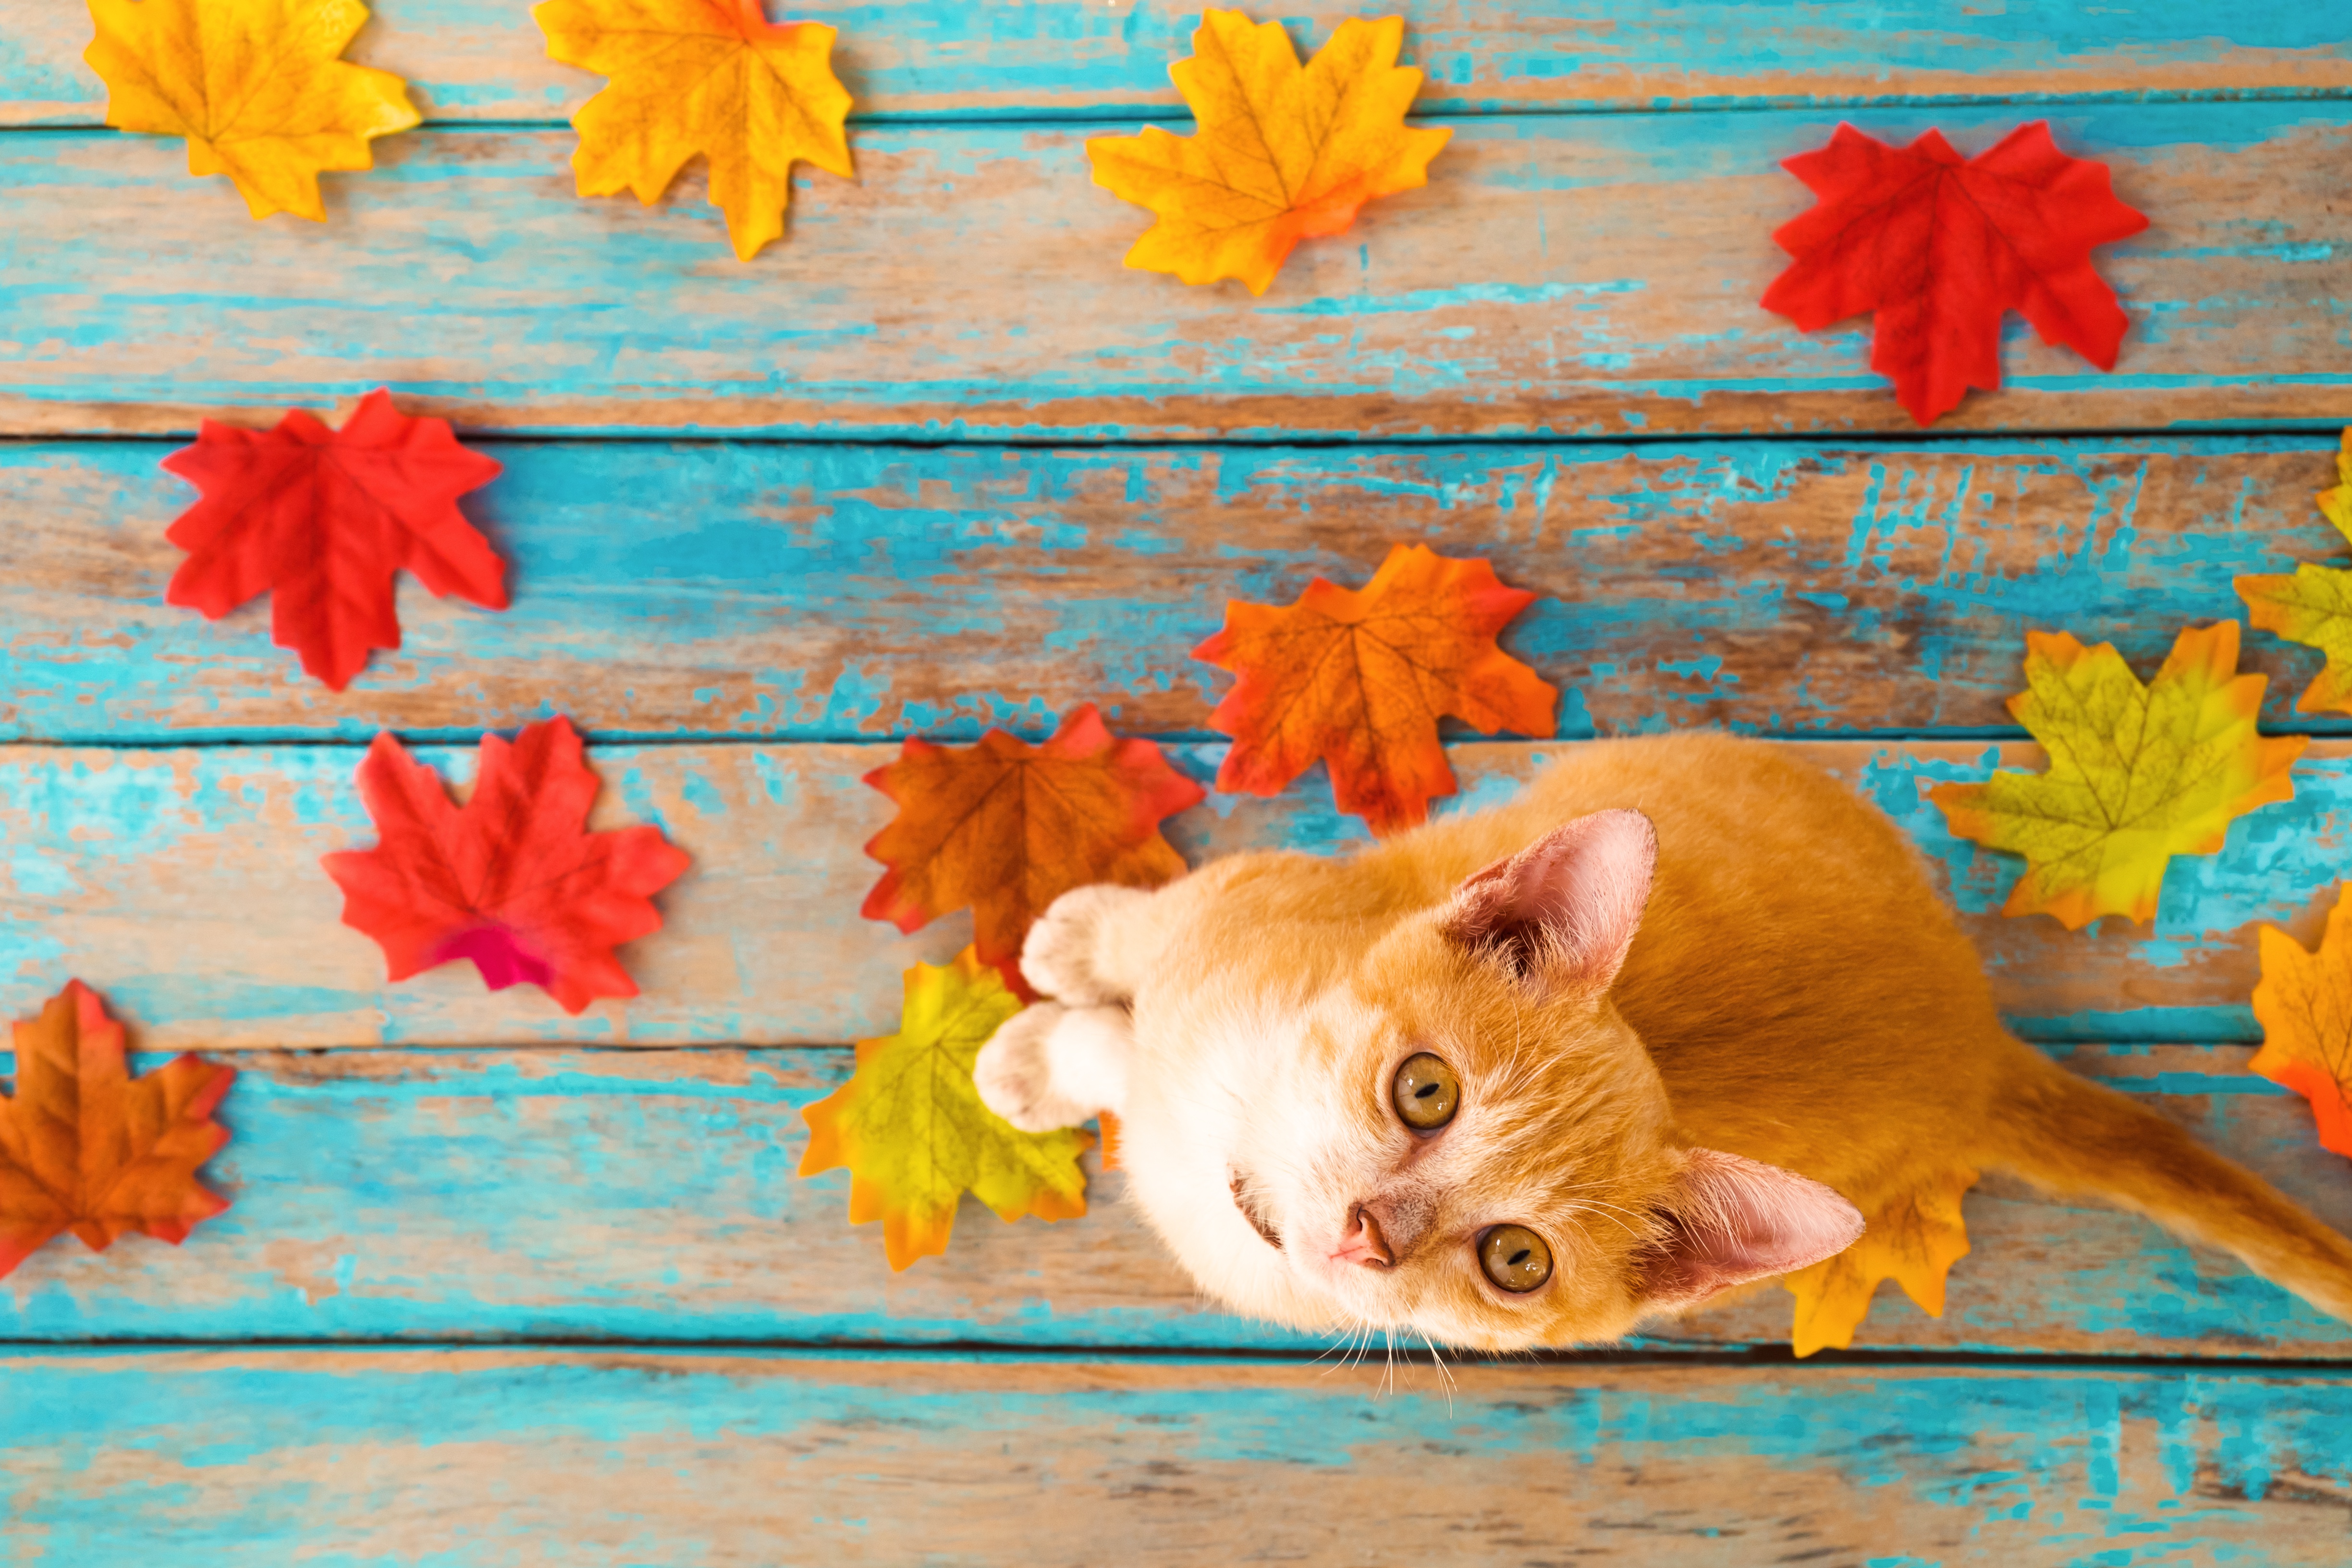 General 4896x3264 animals cats pet top view fallen leaves wooden surface leaves colorful wood planks